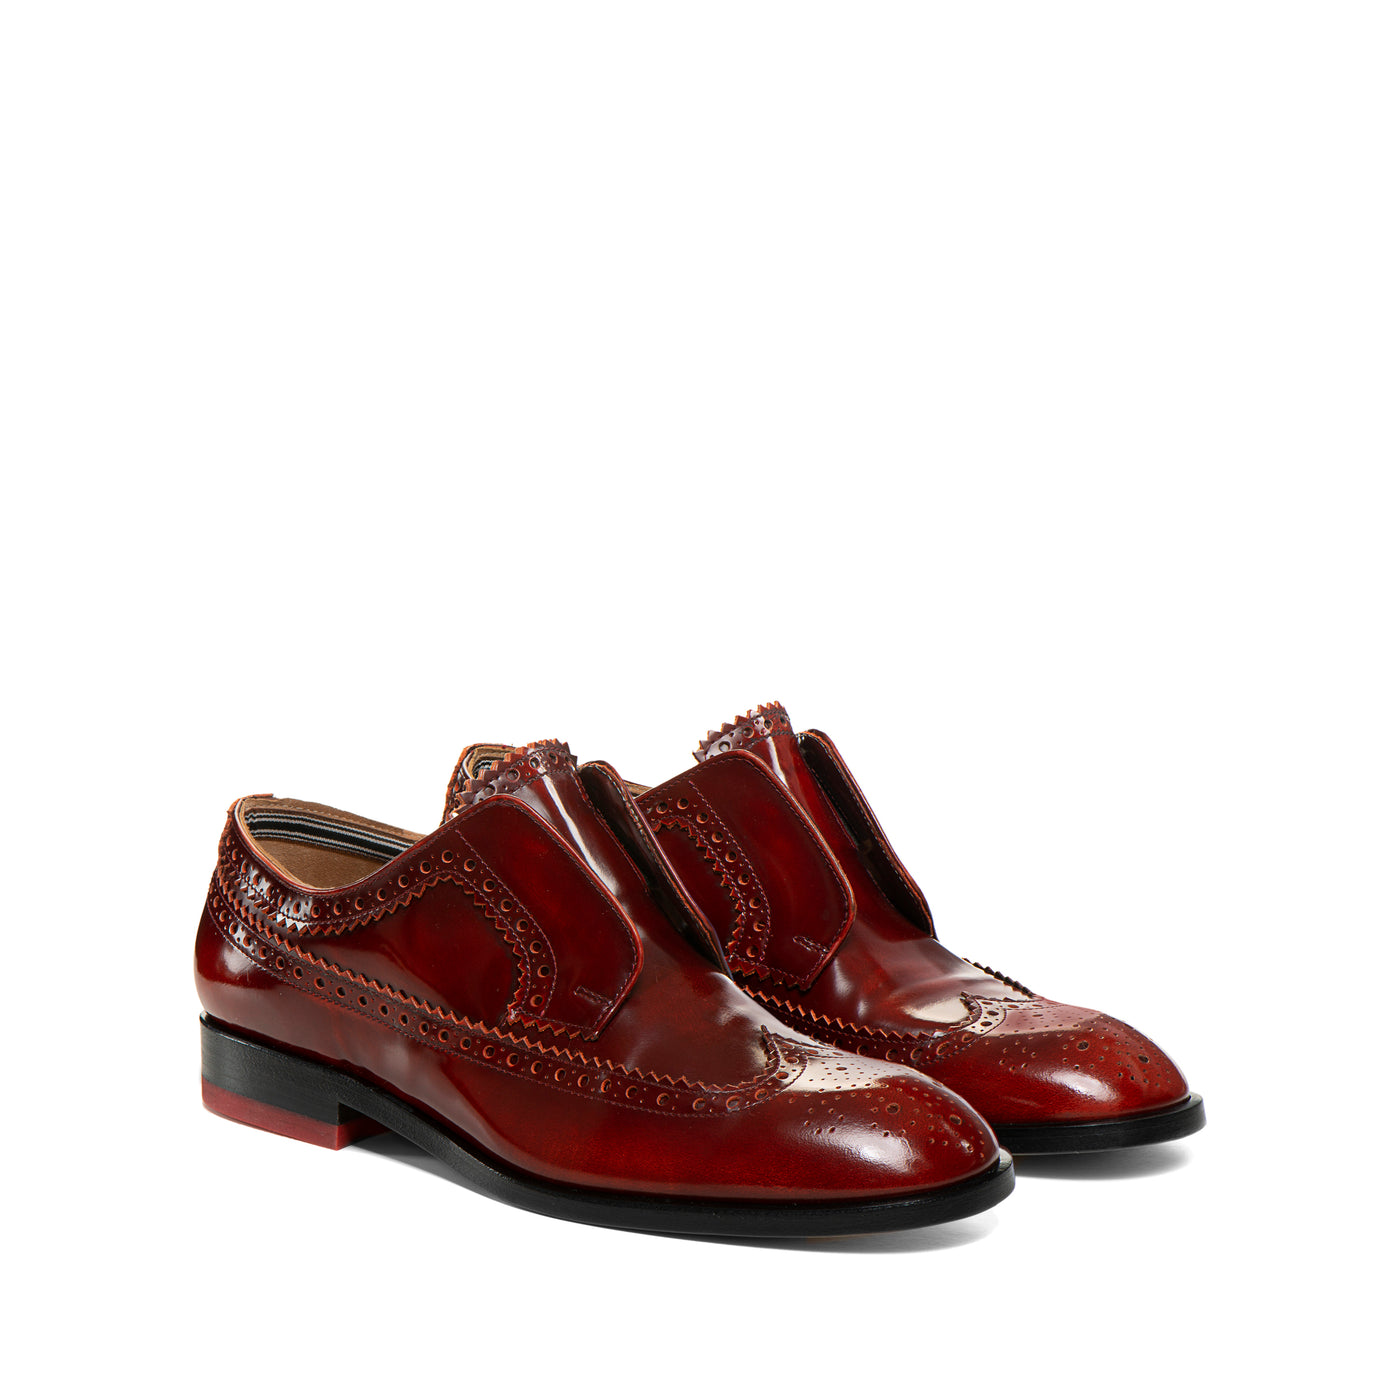 Shop The Latest Collection Of Fratelli Rossetti Woman Dandy Brogue 67214 In Lebanon